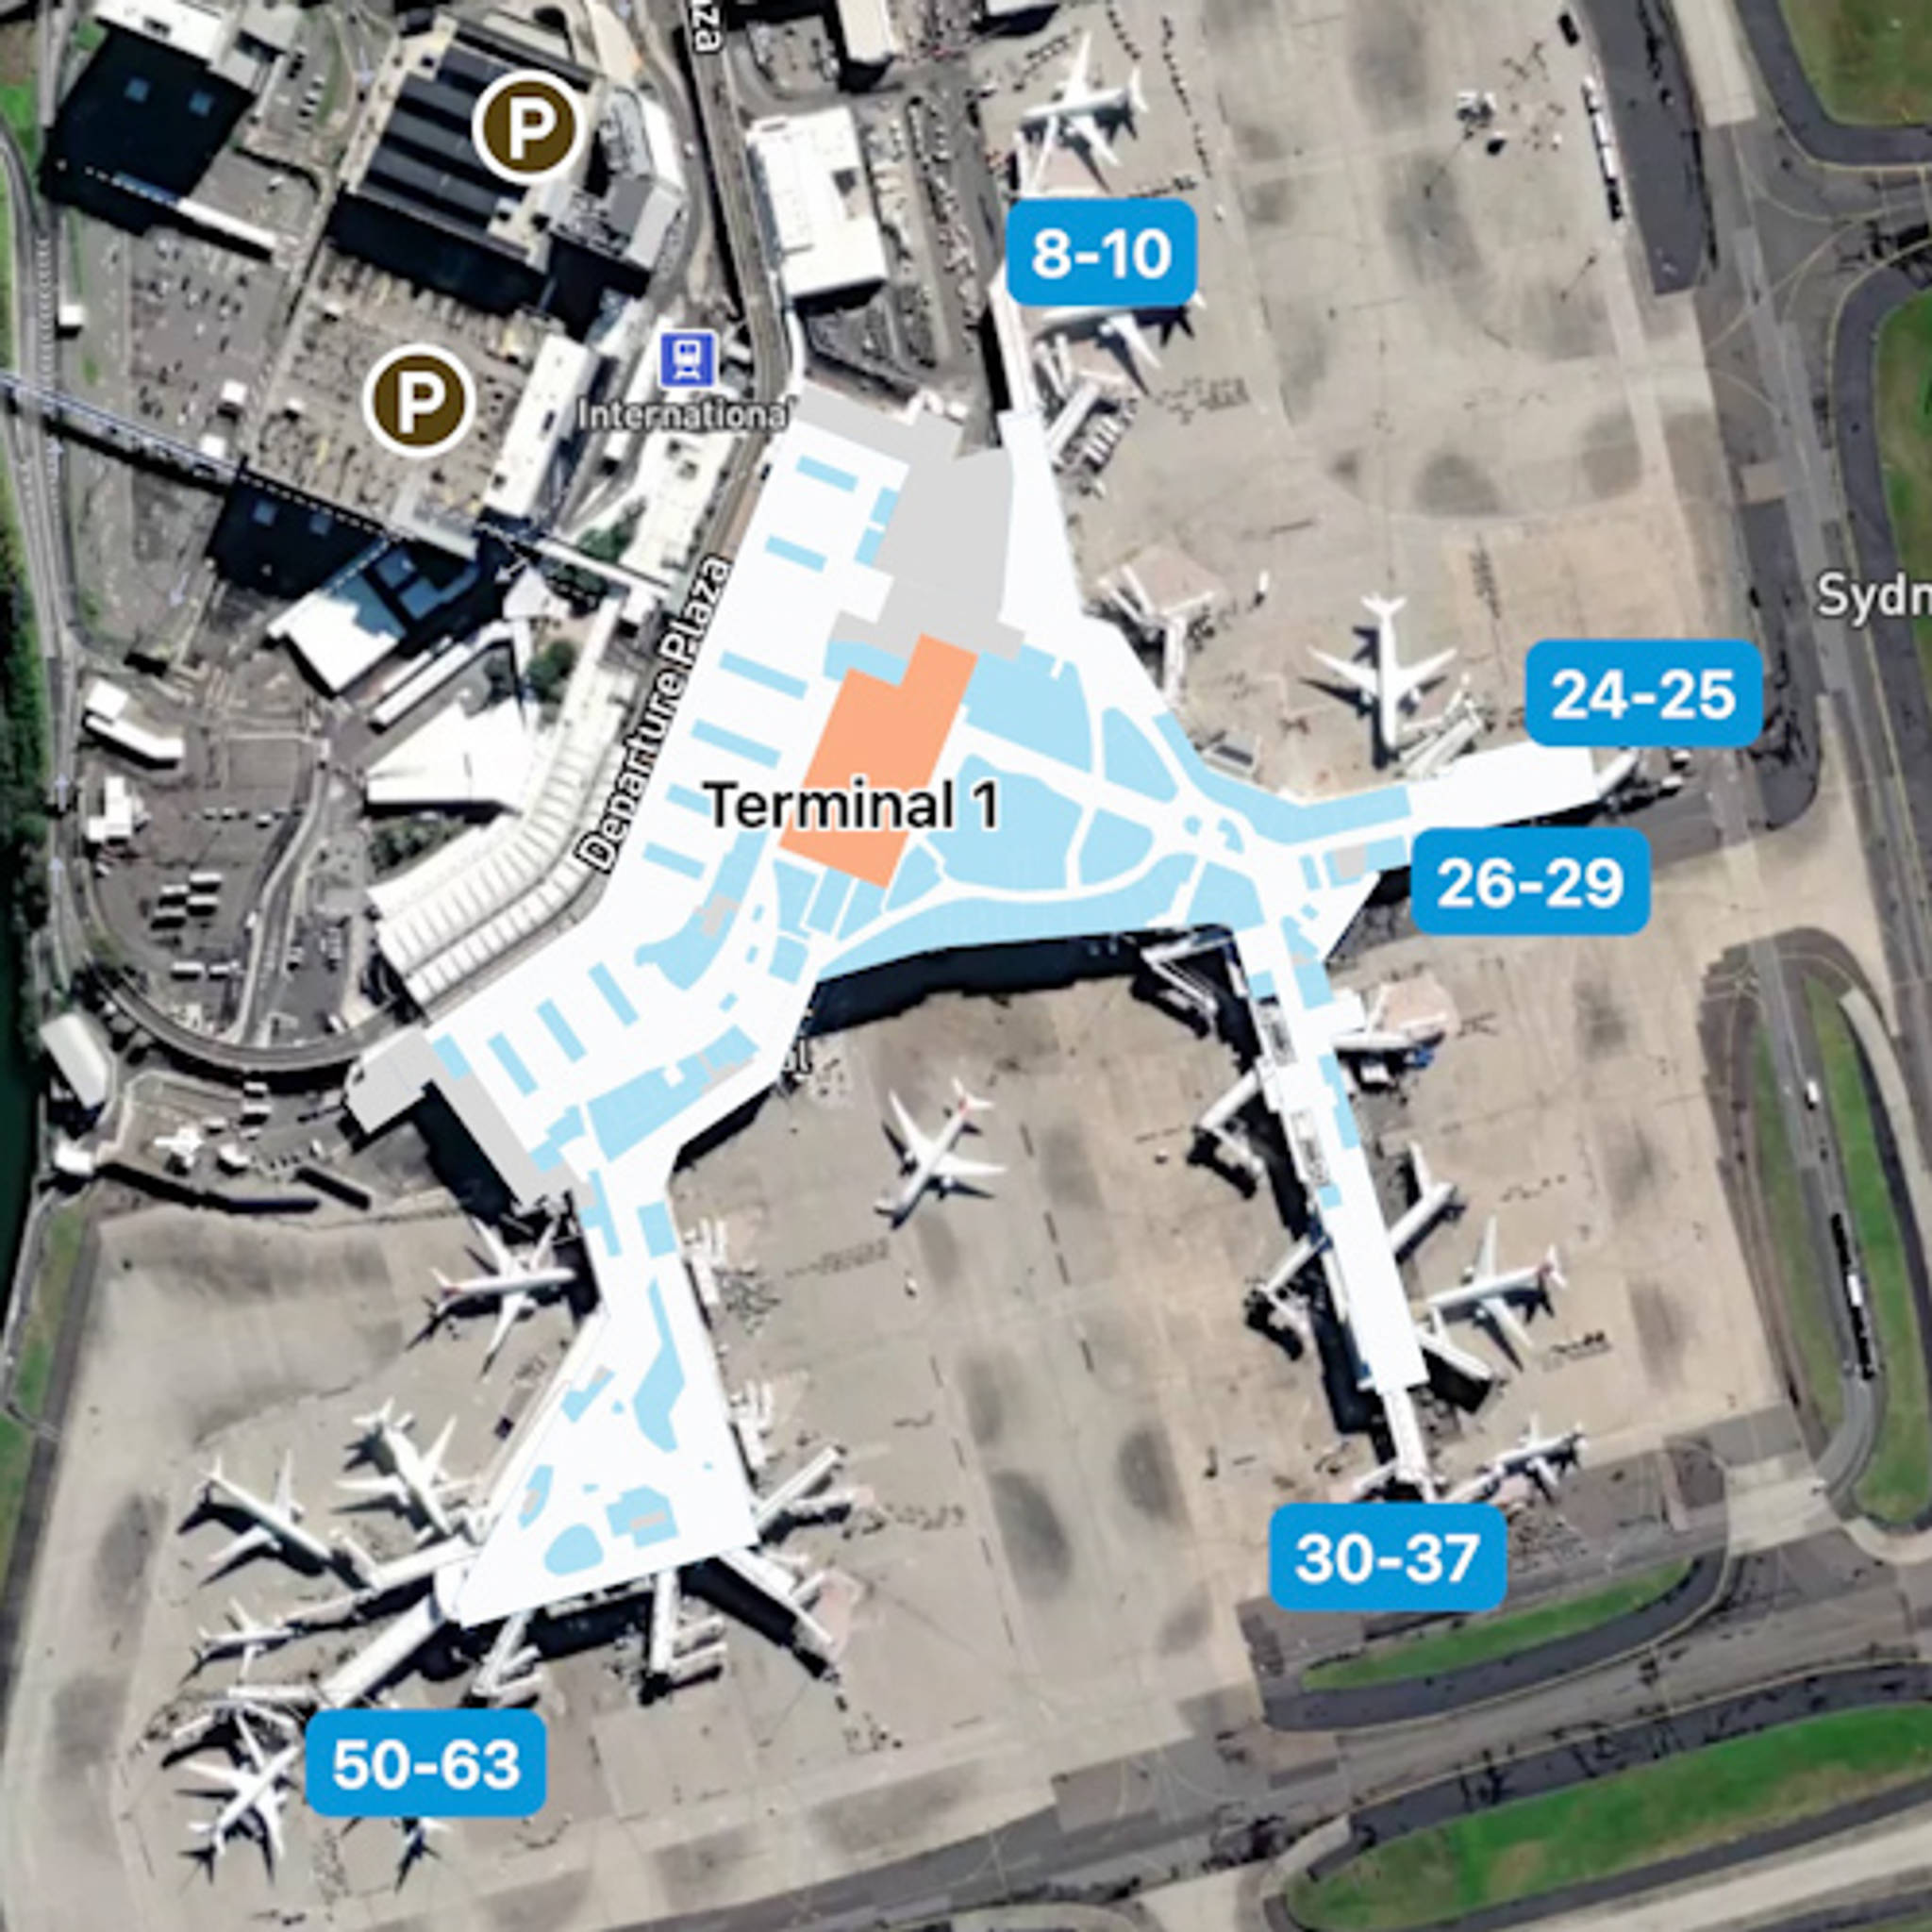 Sydney Kingsford Smith Airport SYD Terminal Overview Map